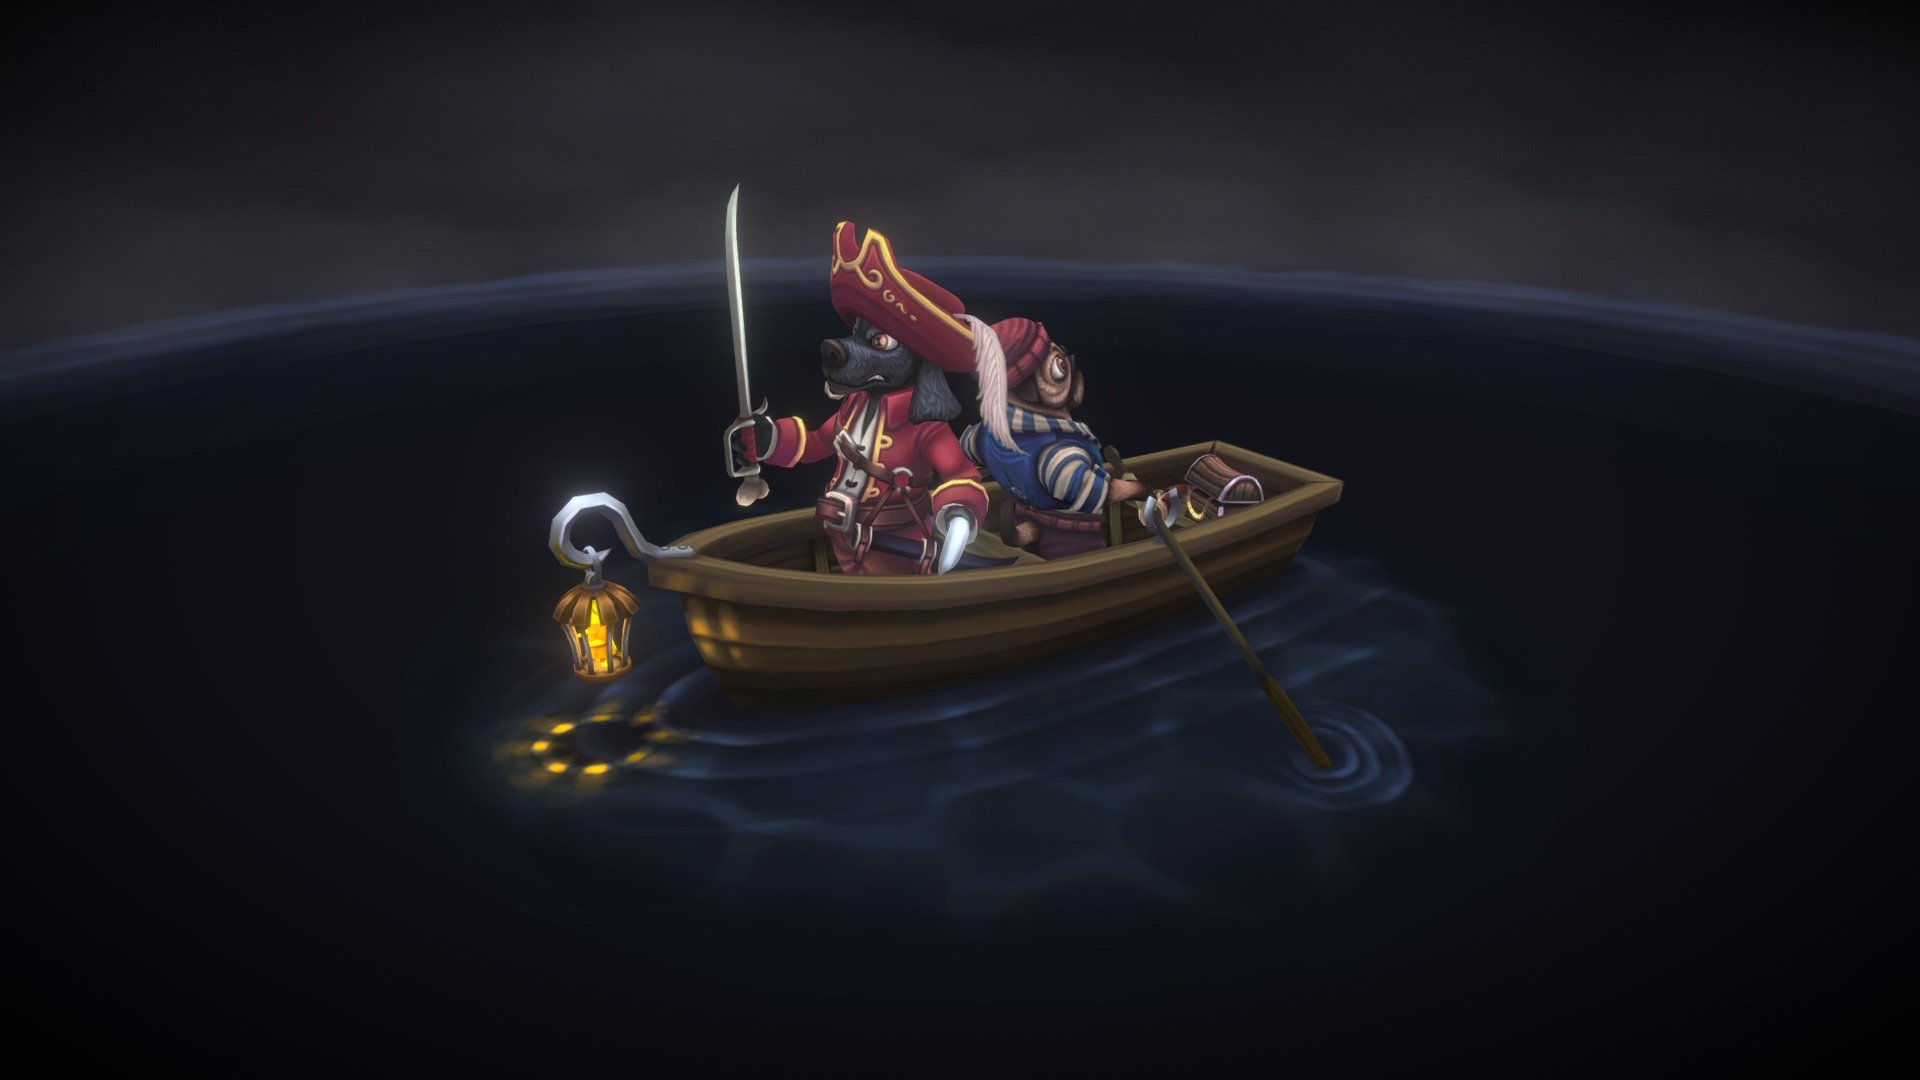 https://www.artstation.com/artwork/VPg6N

starting out as a sketchfab mini comp, this has slowly become a bit of a project that I keep chipping away at and I think I'm finally ready to call this done :)

So presenting&hellip; my take on Hook and Smee from the childhood favourite &lsquo;Peter Pan' presented as a cocker spaniel and a pug, they did it for the musketeers so why not this.

I wanted this to be a personal piece that incorporates a lot of what I have learned with hand painted game assets over the last few years in my paid work, and while I know there are still plenty of areas to improve in, I am really happy with this, and hope others can enjoy it too. maybe I'll find someone to animate them for me at some point :) - Pirate scene - Hook and Smee - 3D model by Damian Case (@damianc) 3d model